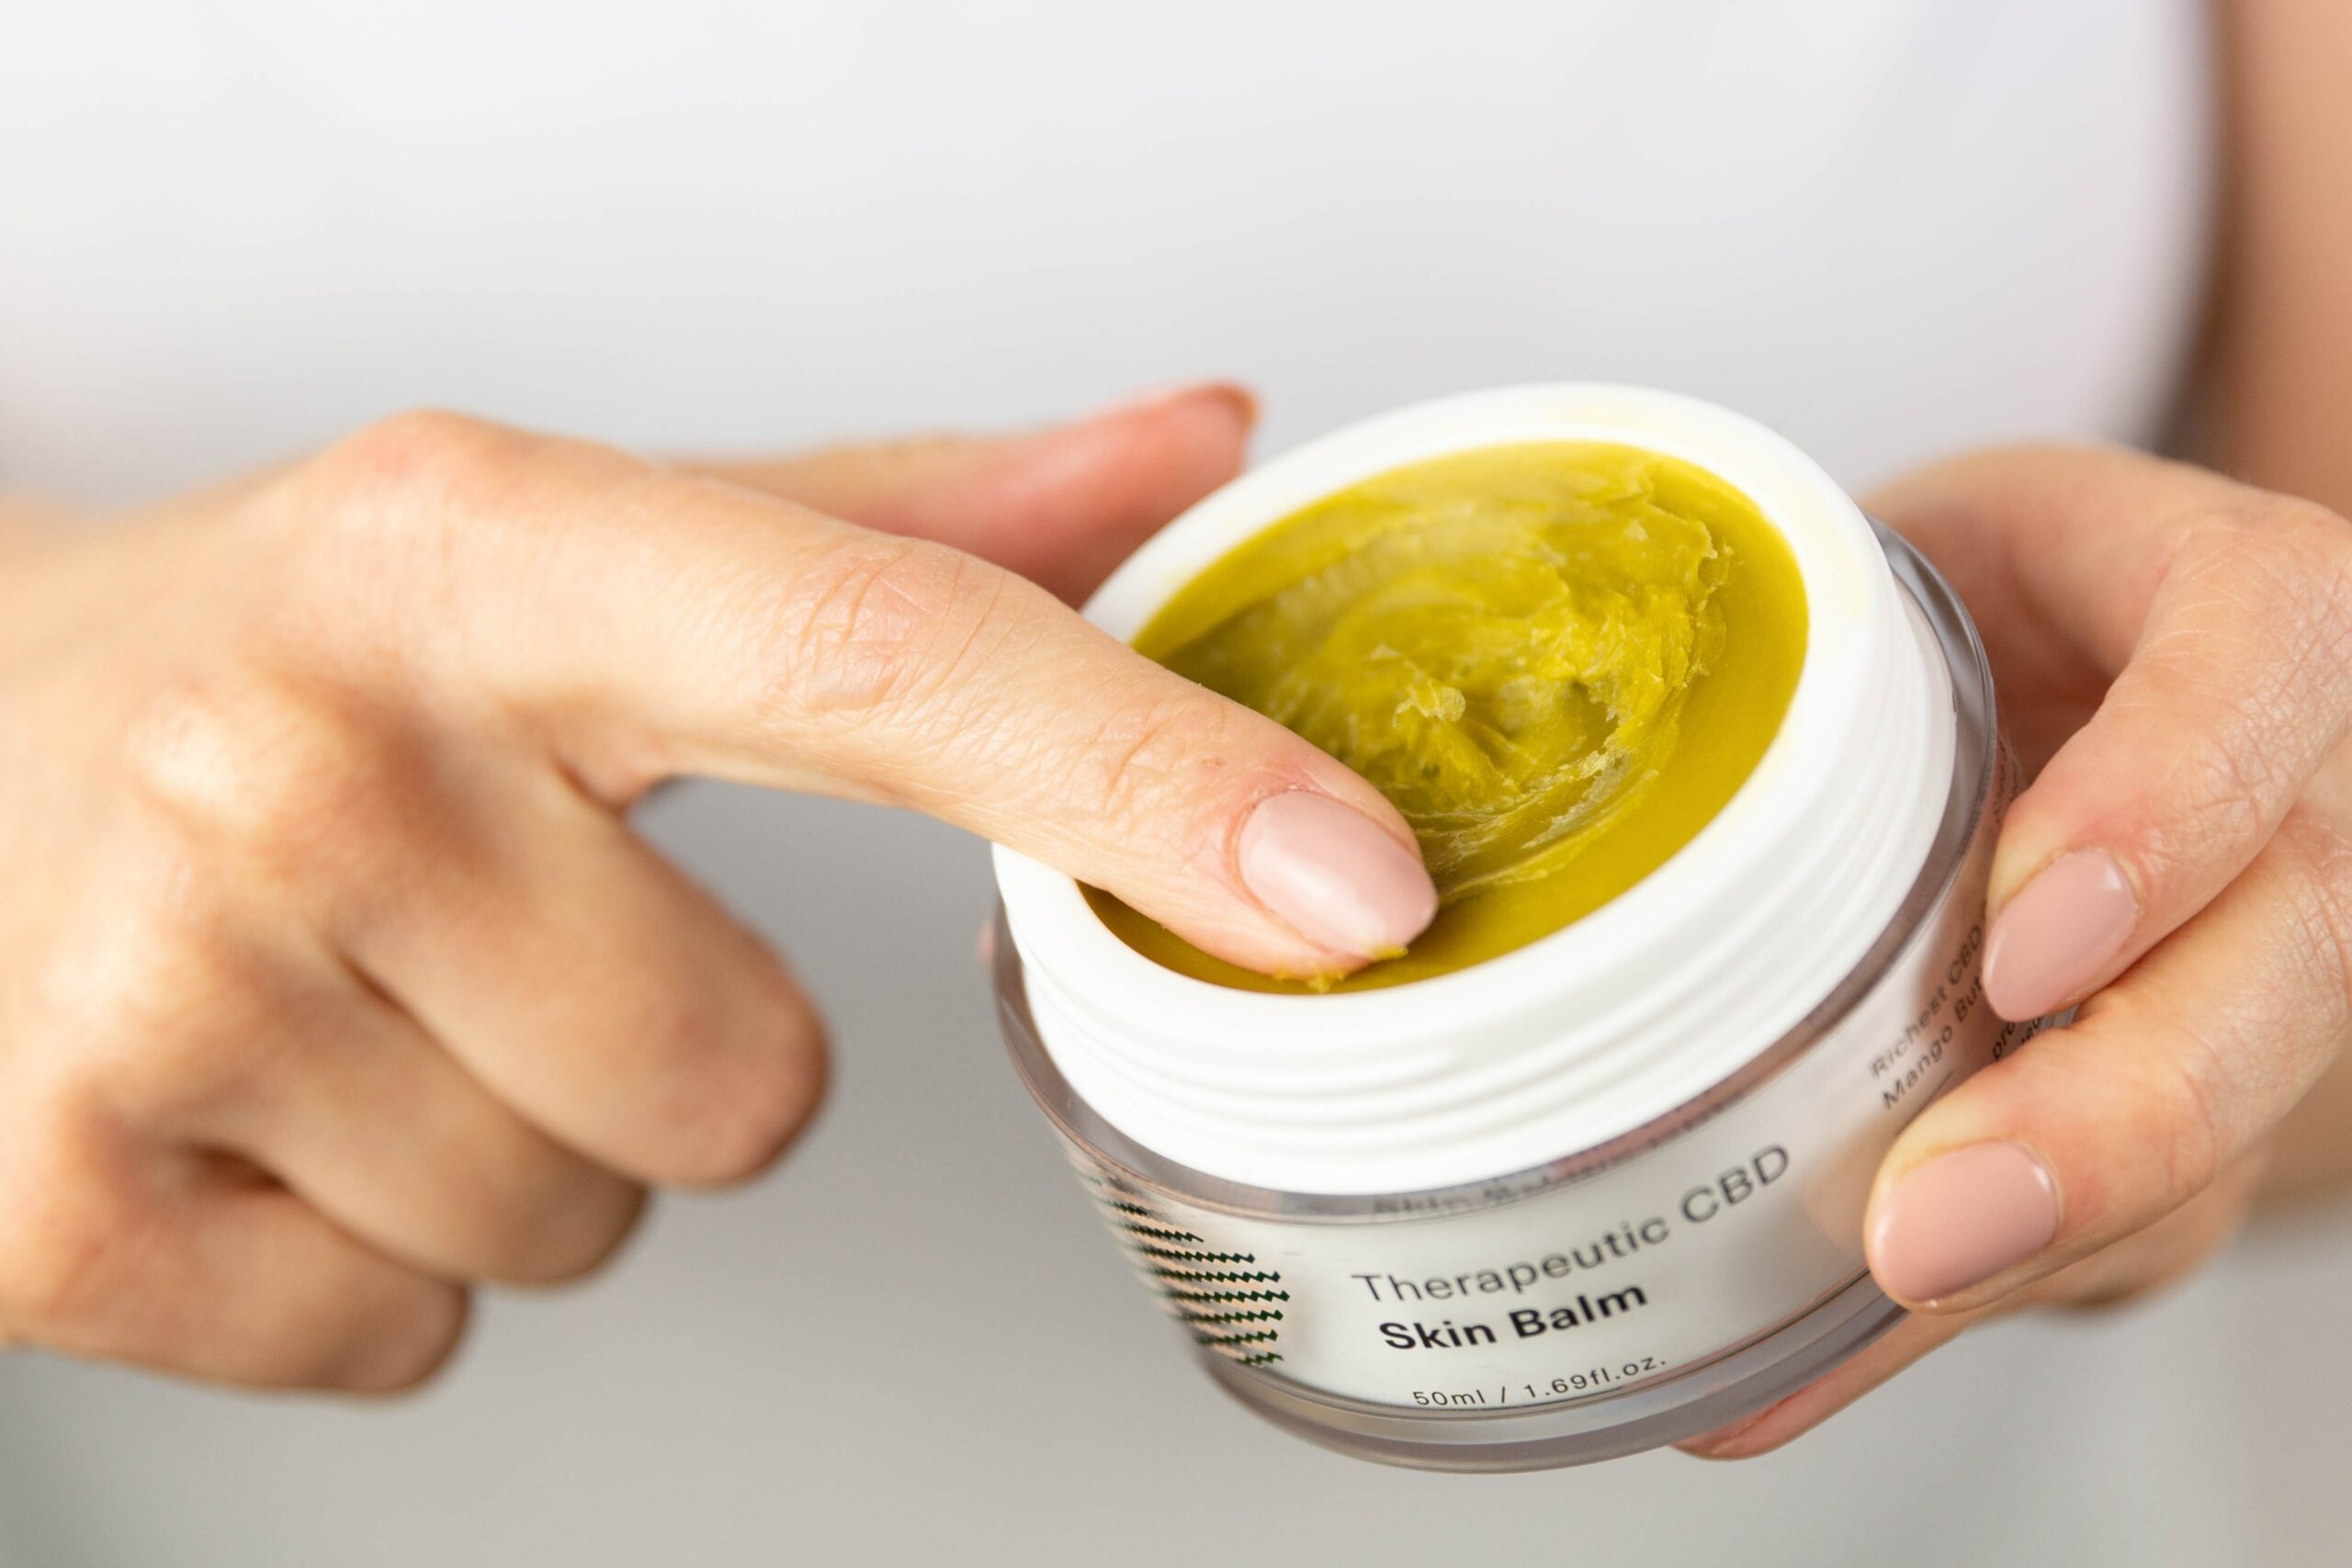 Khiron Secures Approval to Sell Three More CBD Wellness Products